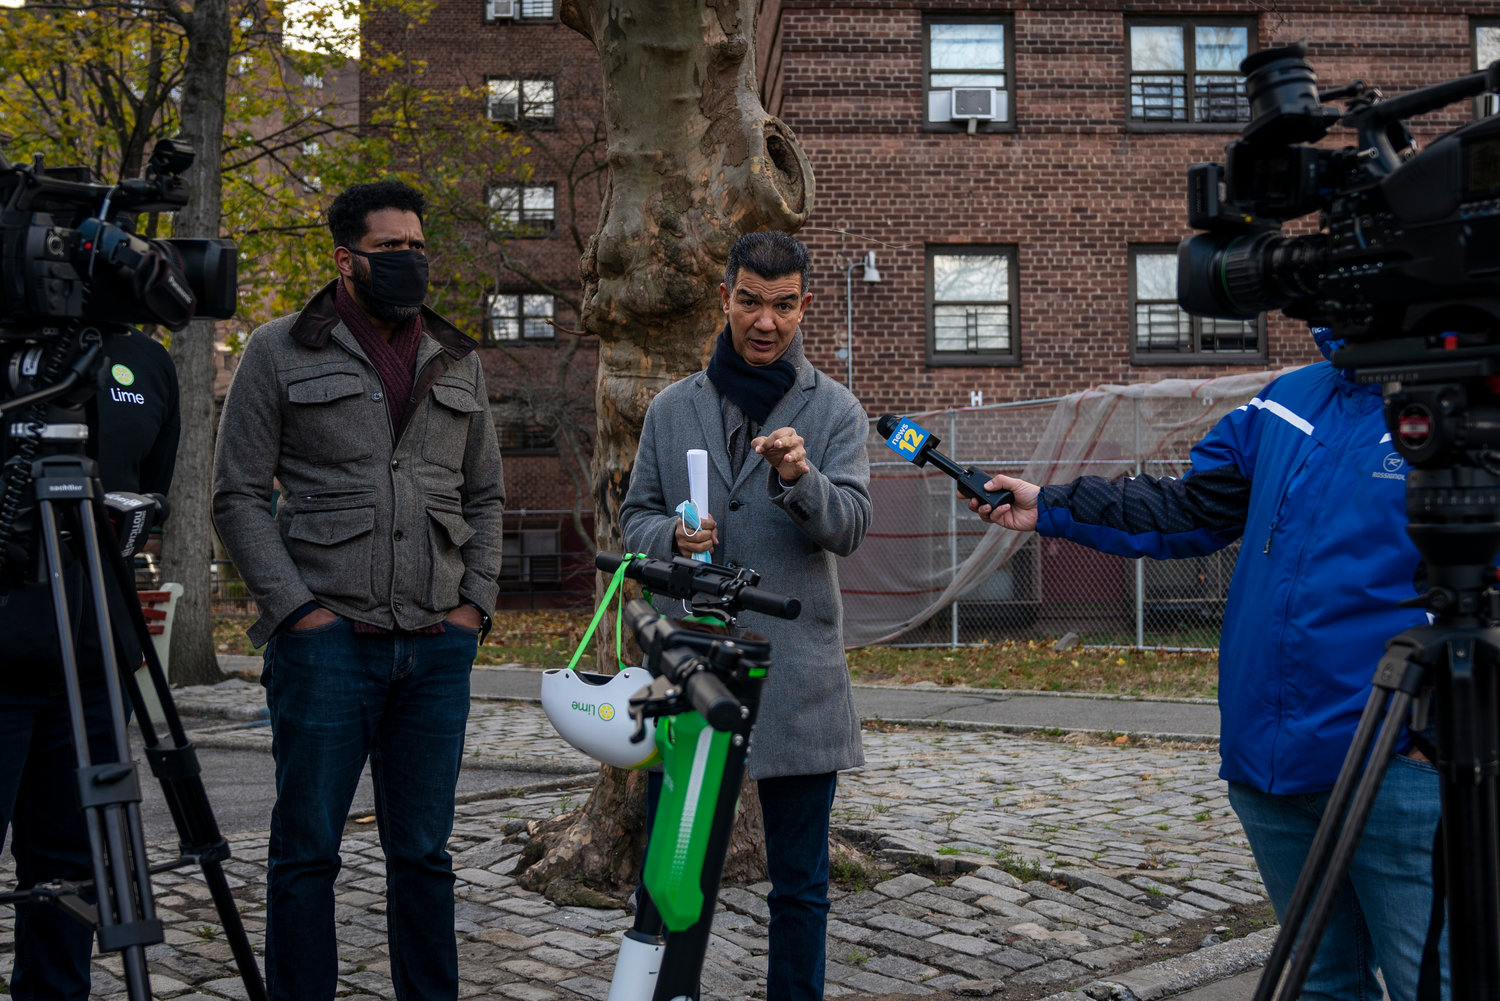 Residents of the Marble Hill Houses and other NYCHA properties might benefit from the city’s proposed e-scooter pilot program. According to e-scooter company Lime, other cities provide reduced-price options for riders on public assistance.